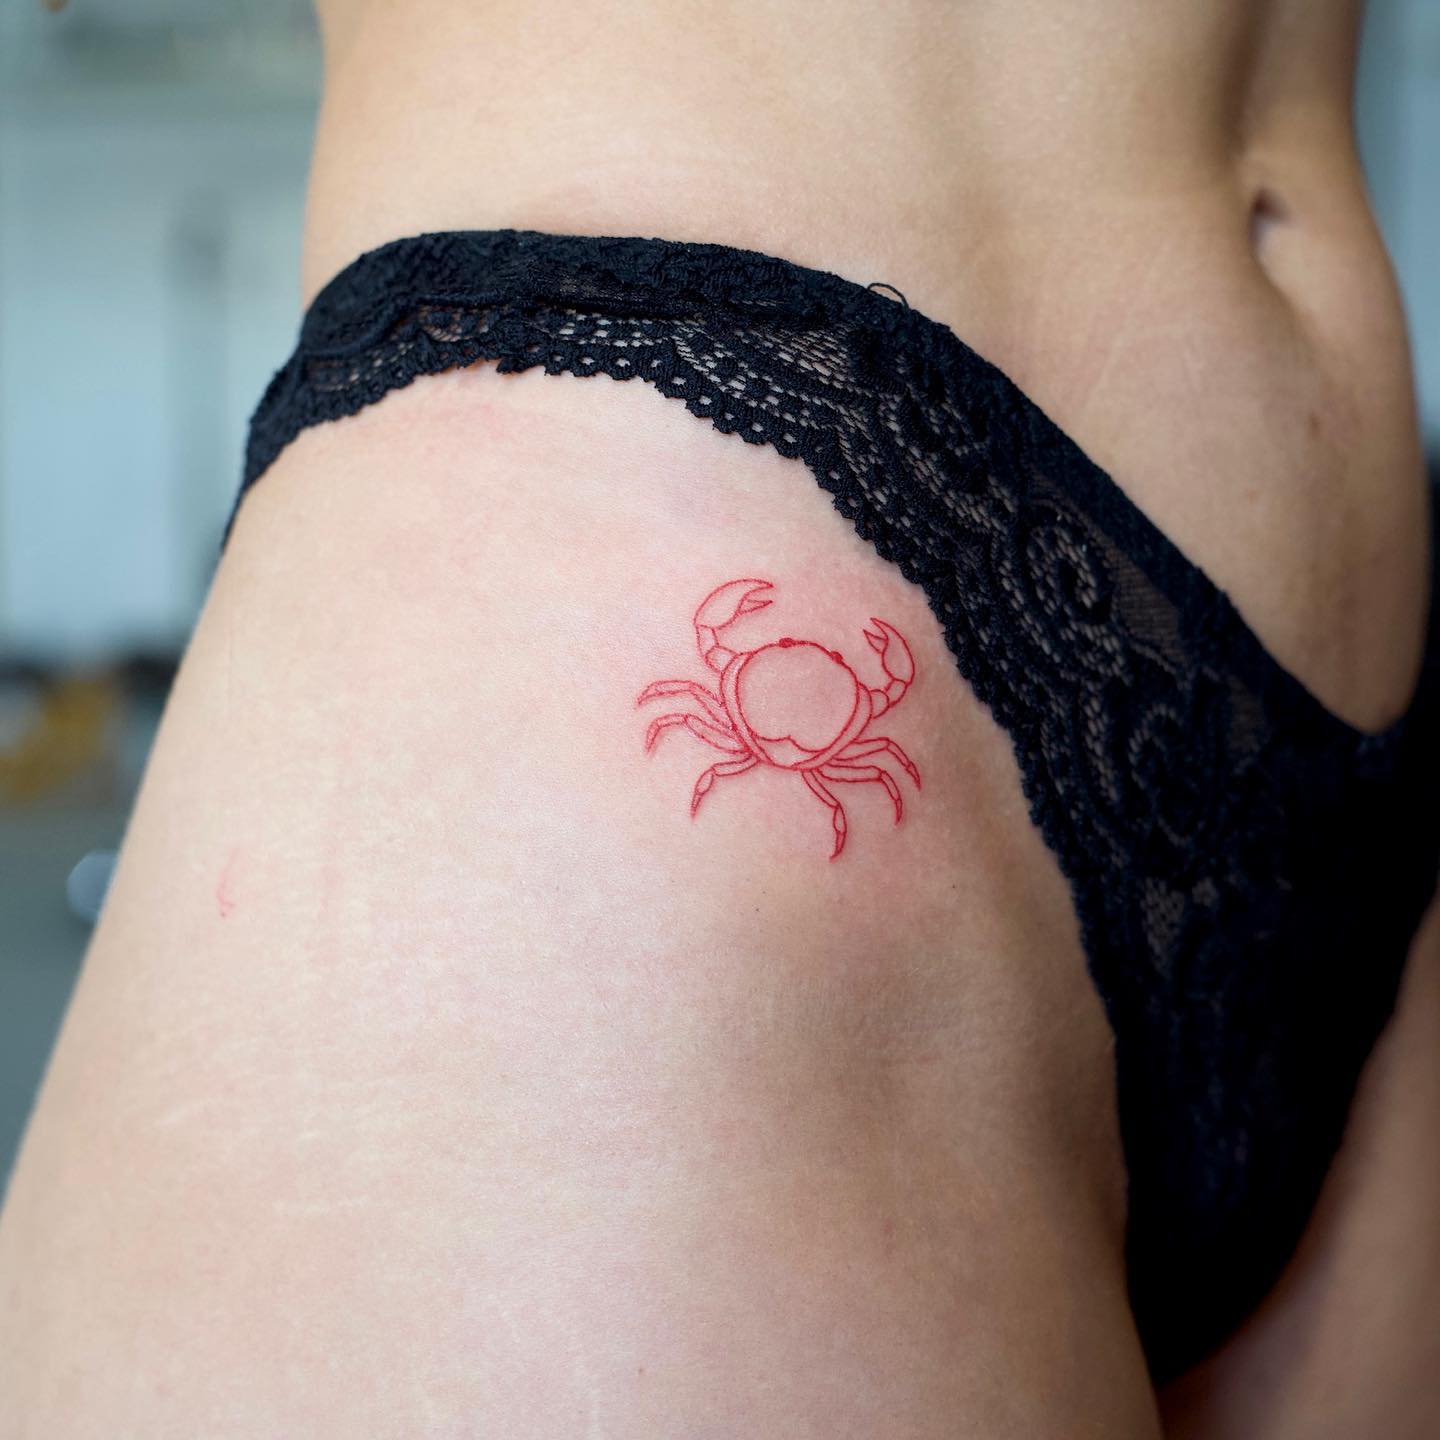 A small crab tattoo on your hip will suit women who like the sea/summer period or those who are cancer in the zodiac astrology.